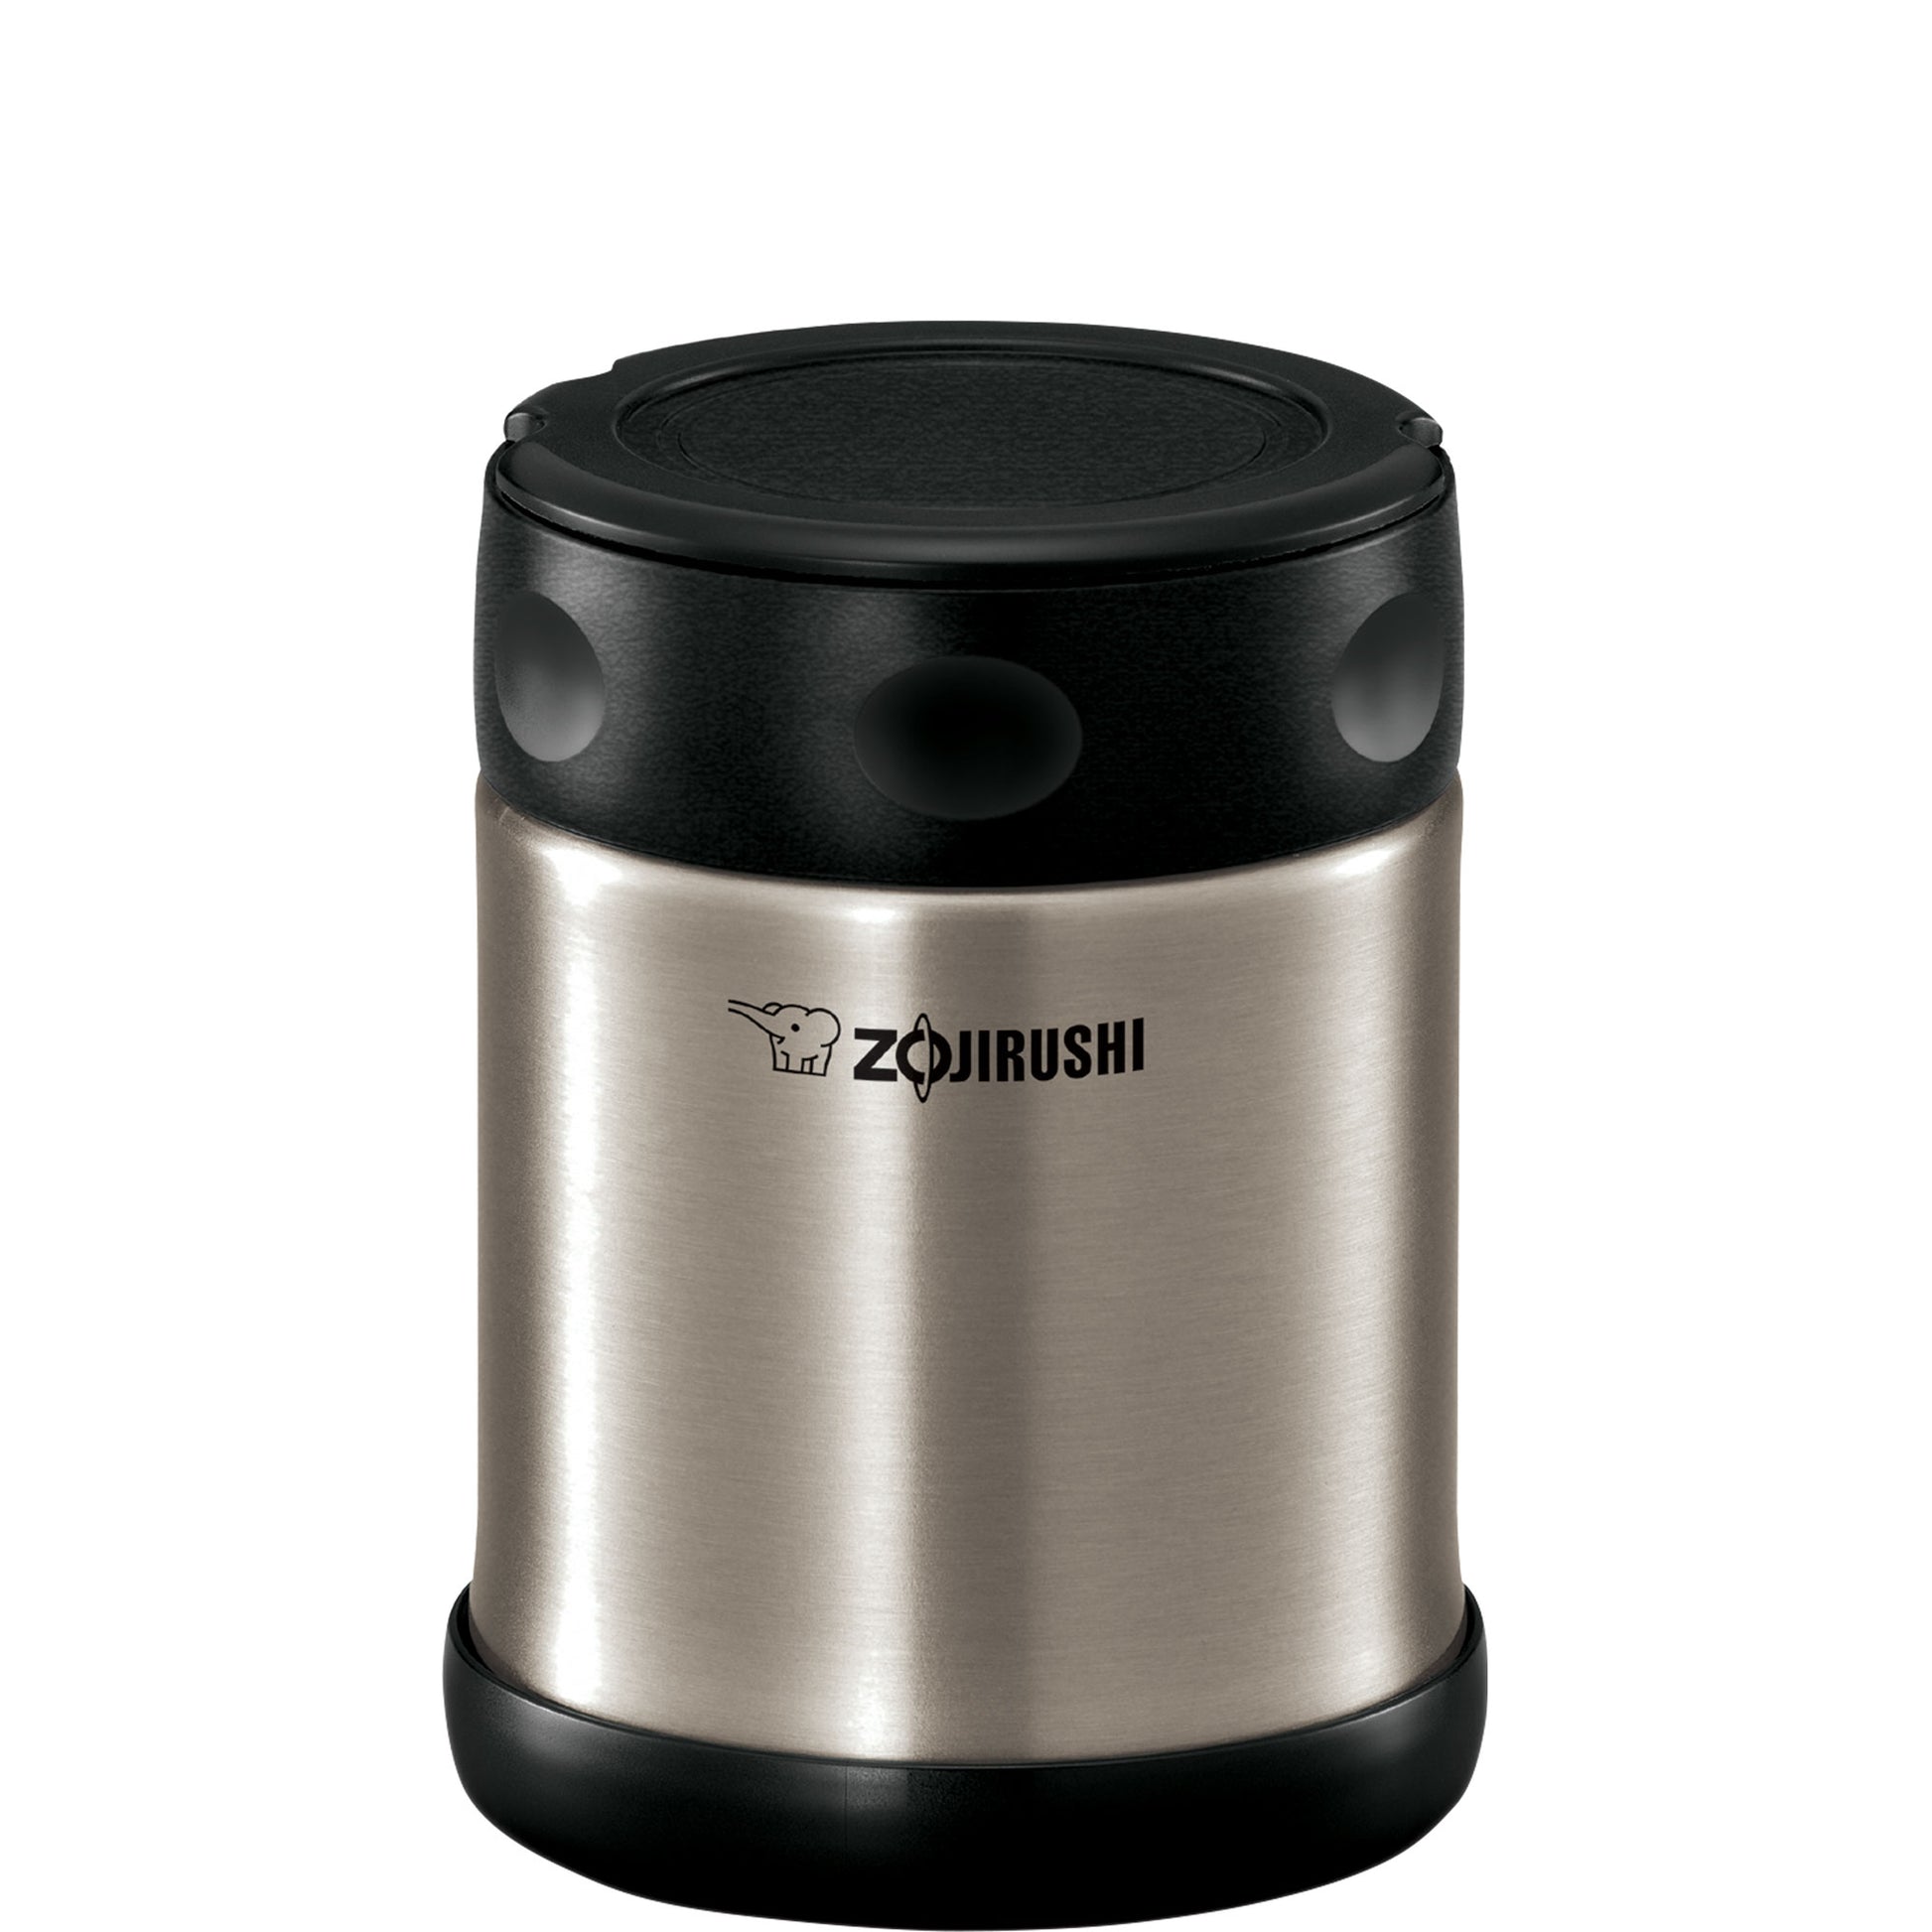 ZOJIRUSHI Stainless Steel Lunch Jar - Stainless Steel (SL-NCE09-ST